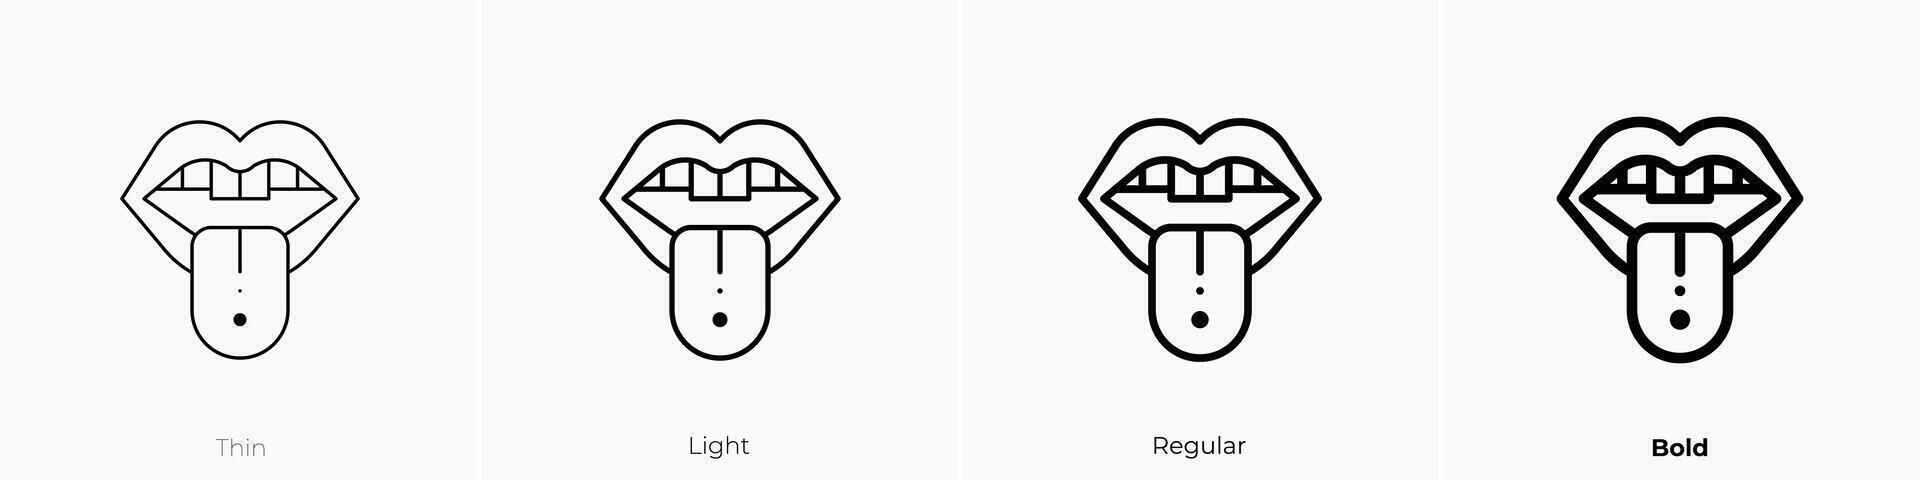 mouth icon. Thin, Light, Regular And Bold style design isolated on white background vector